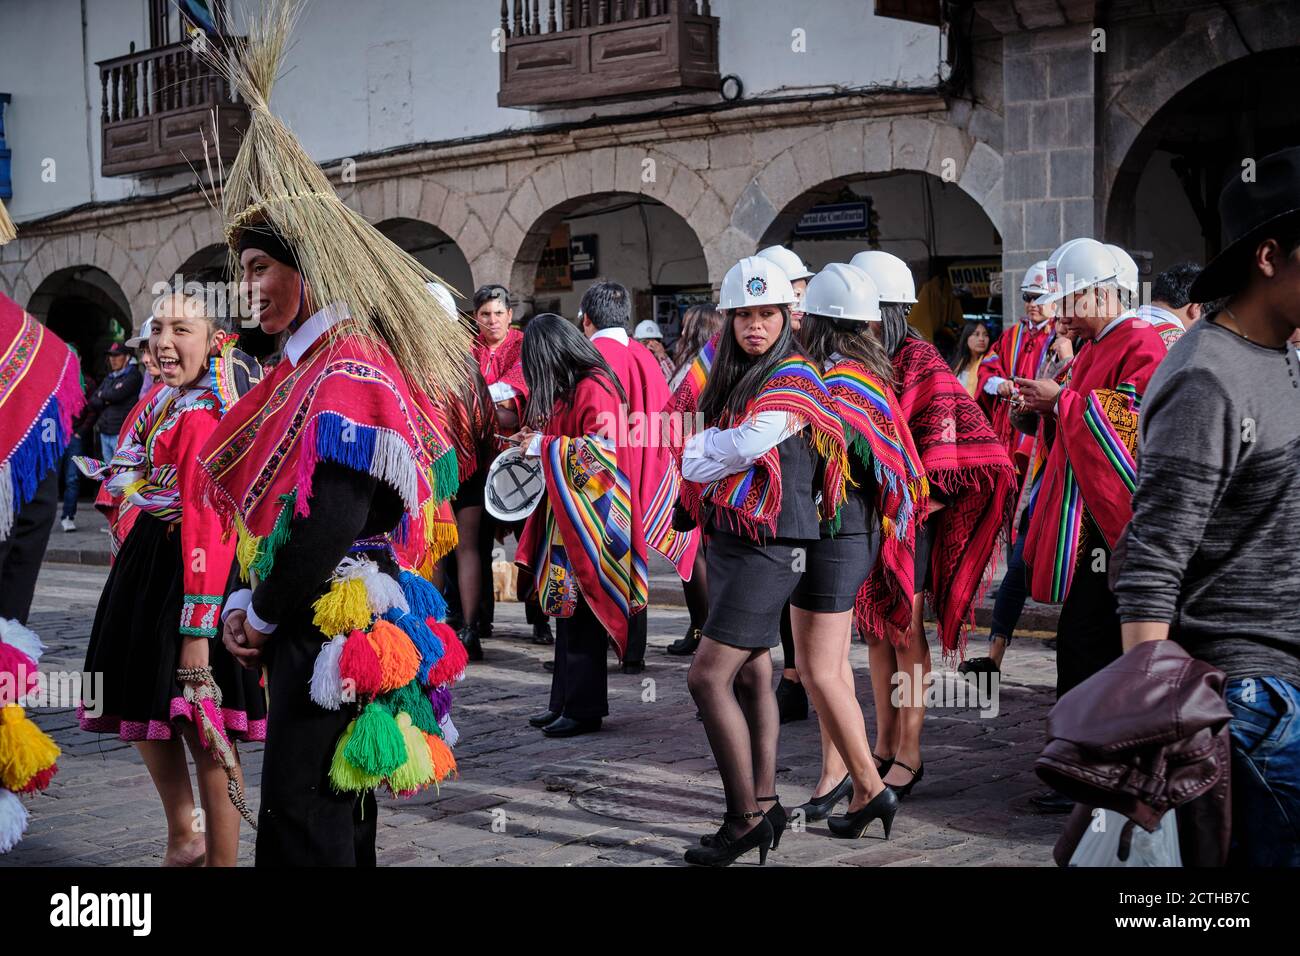 Female engineers in hard hats women waiting their turn in the procession for the Inti Raymi'rata sun festival over the winter solstice, Cusco, Peru Stock Photo